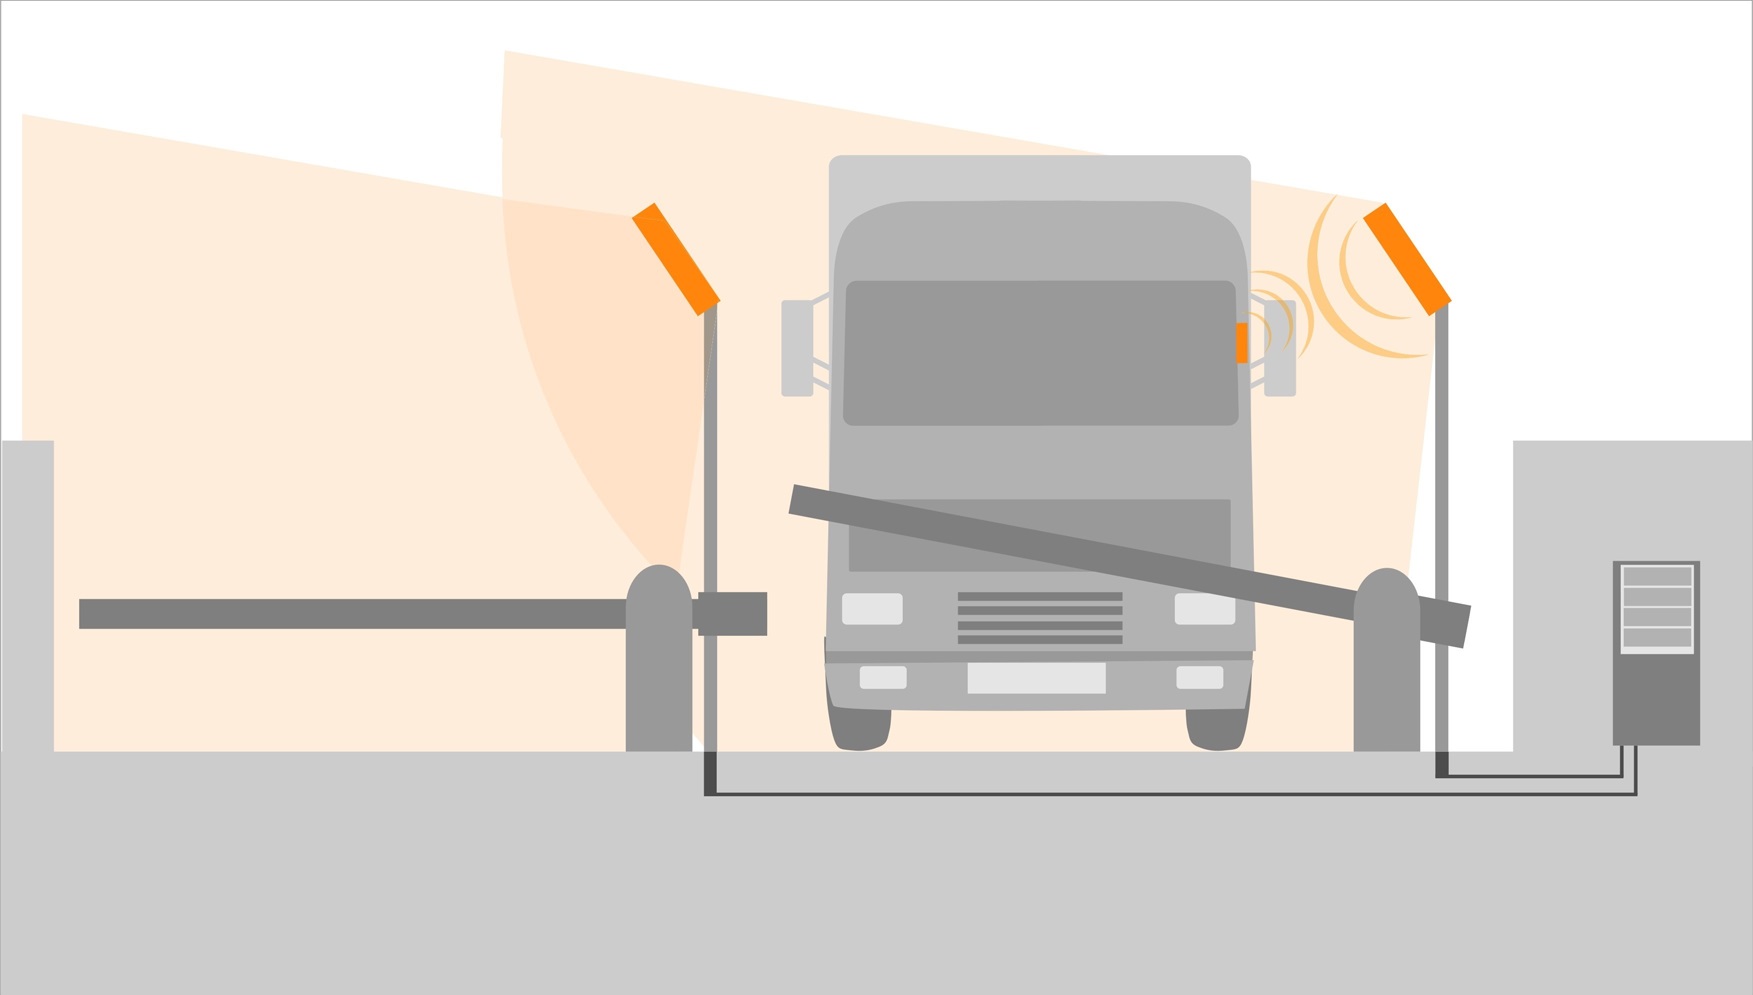 RFID for truck monitoring